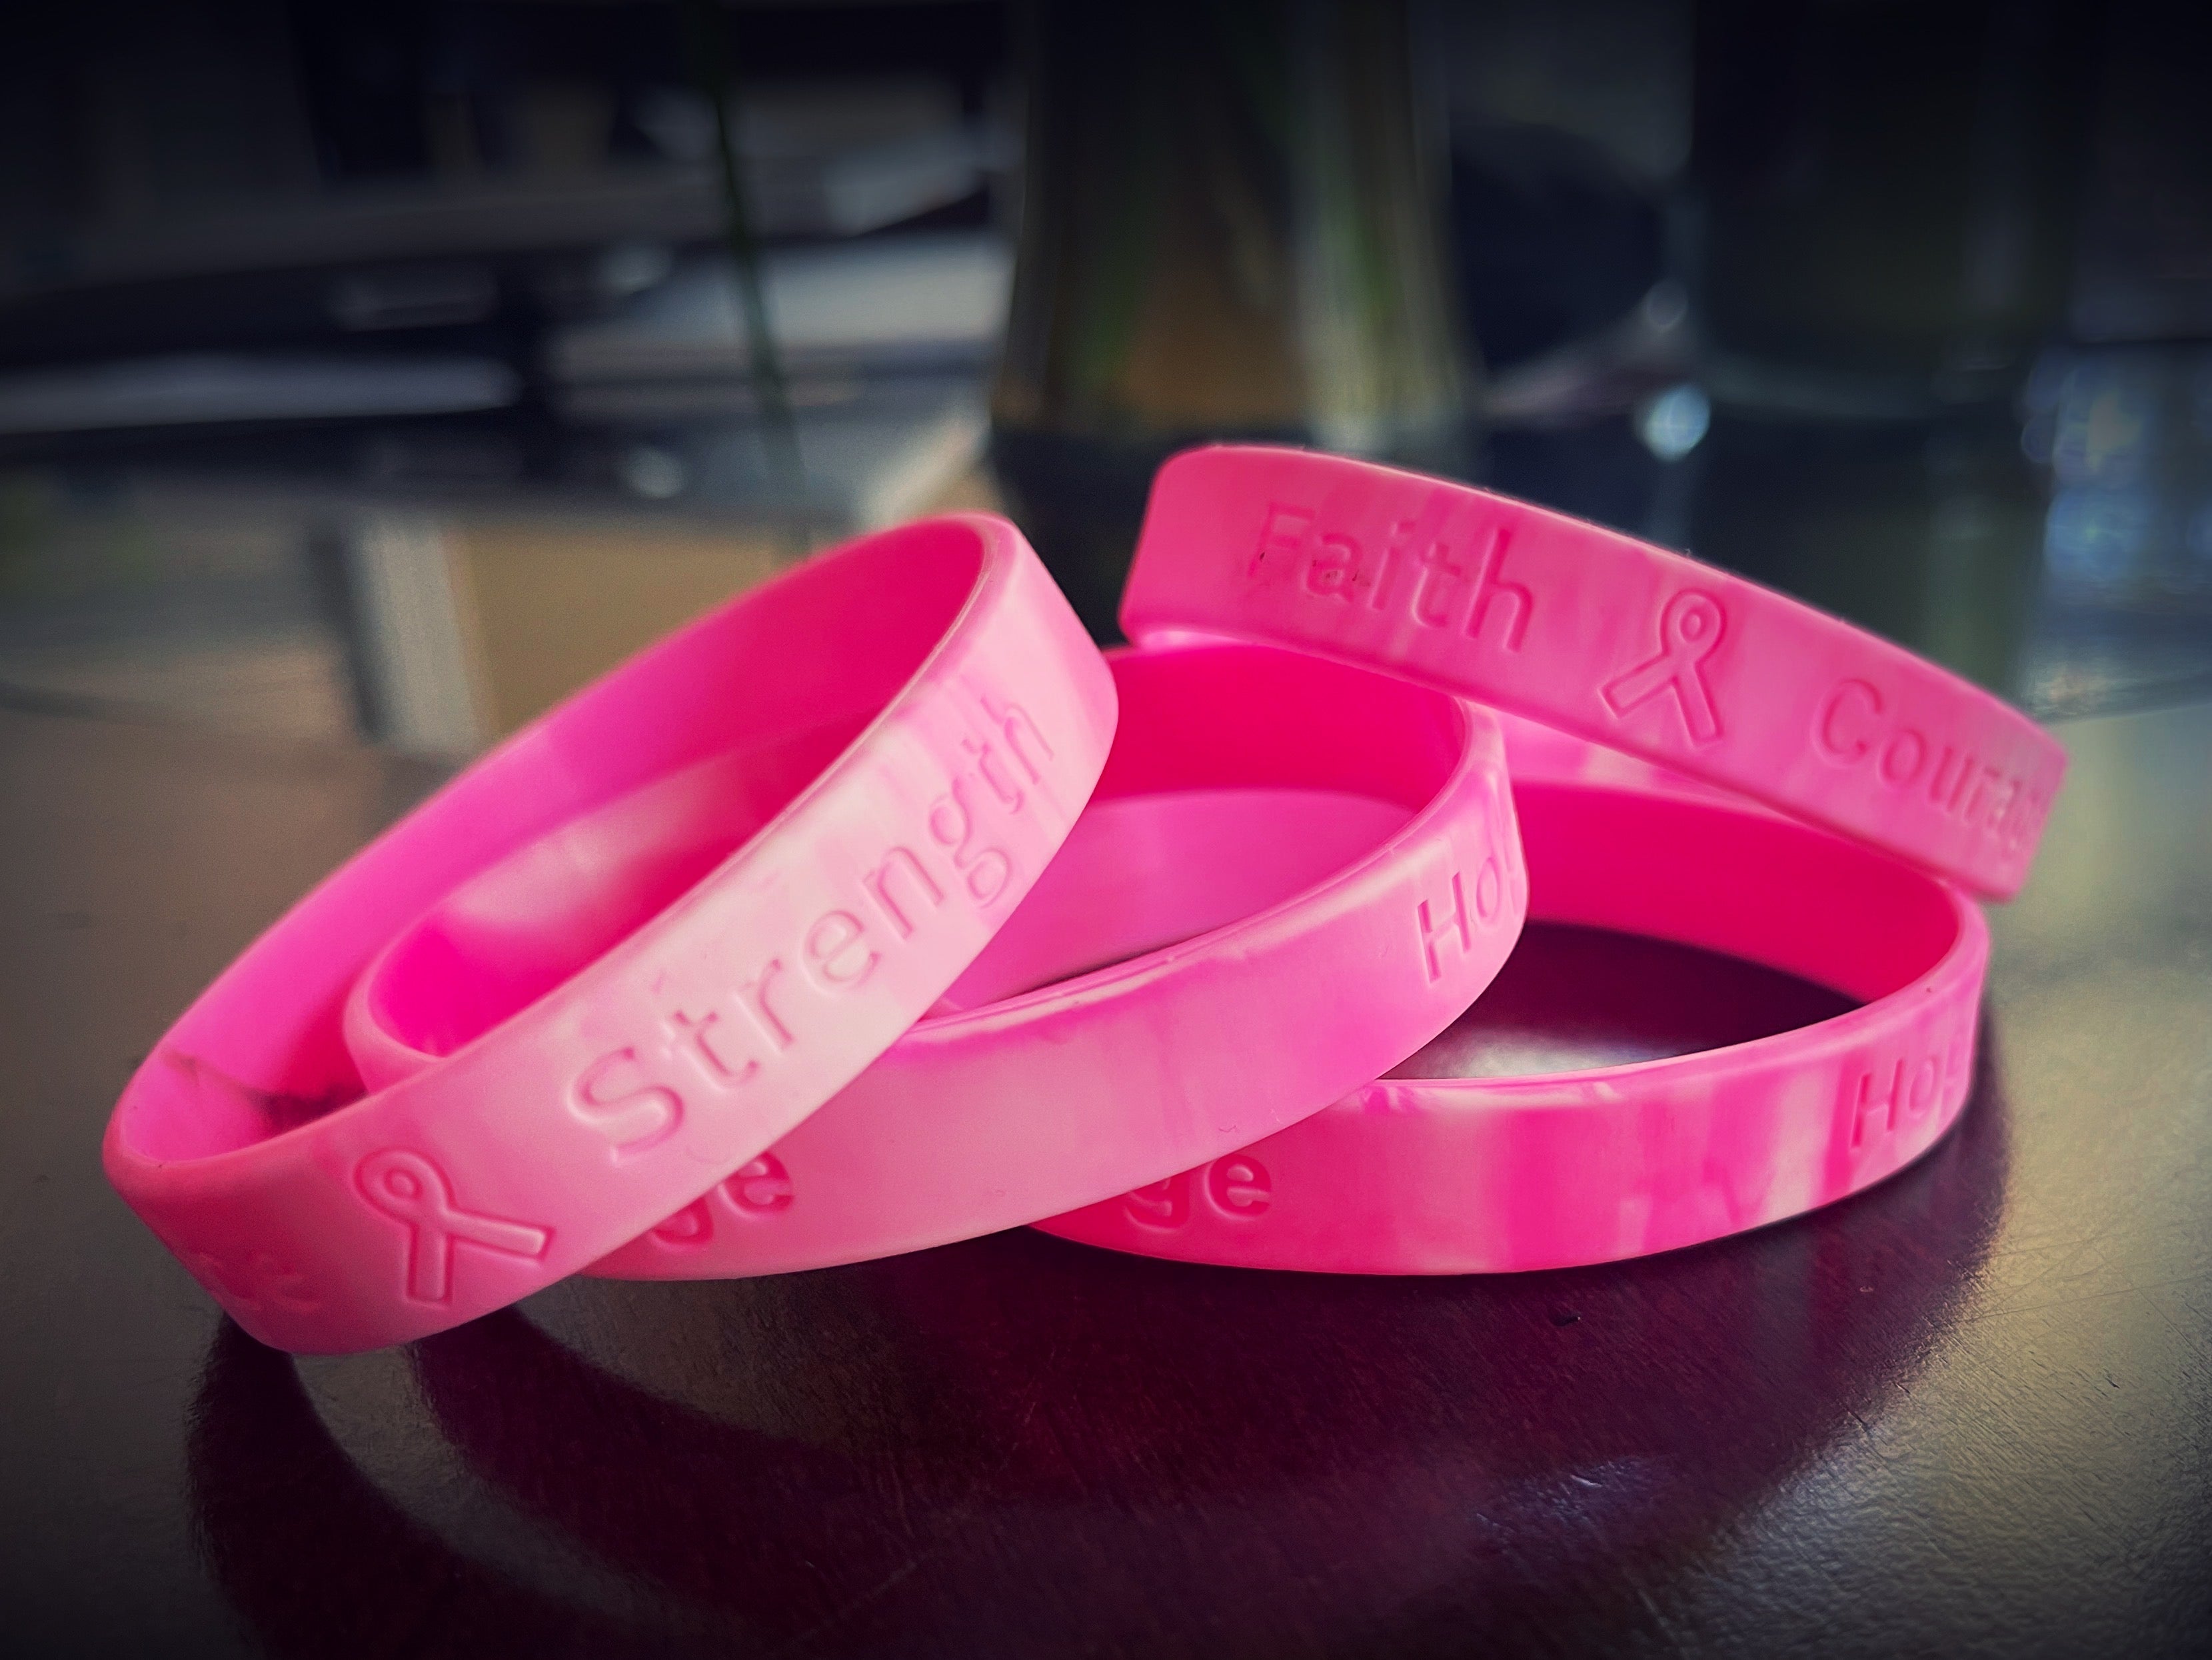 Skeleteen Breast Cancer Awareness Bracelets  Pink Ribbon Camouflage Silicone  Rubber Cancer Support Bulk Party Giveaways Favors  Lot of 50  Walmartcom